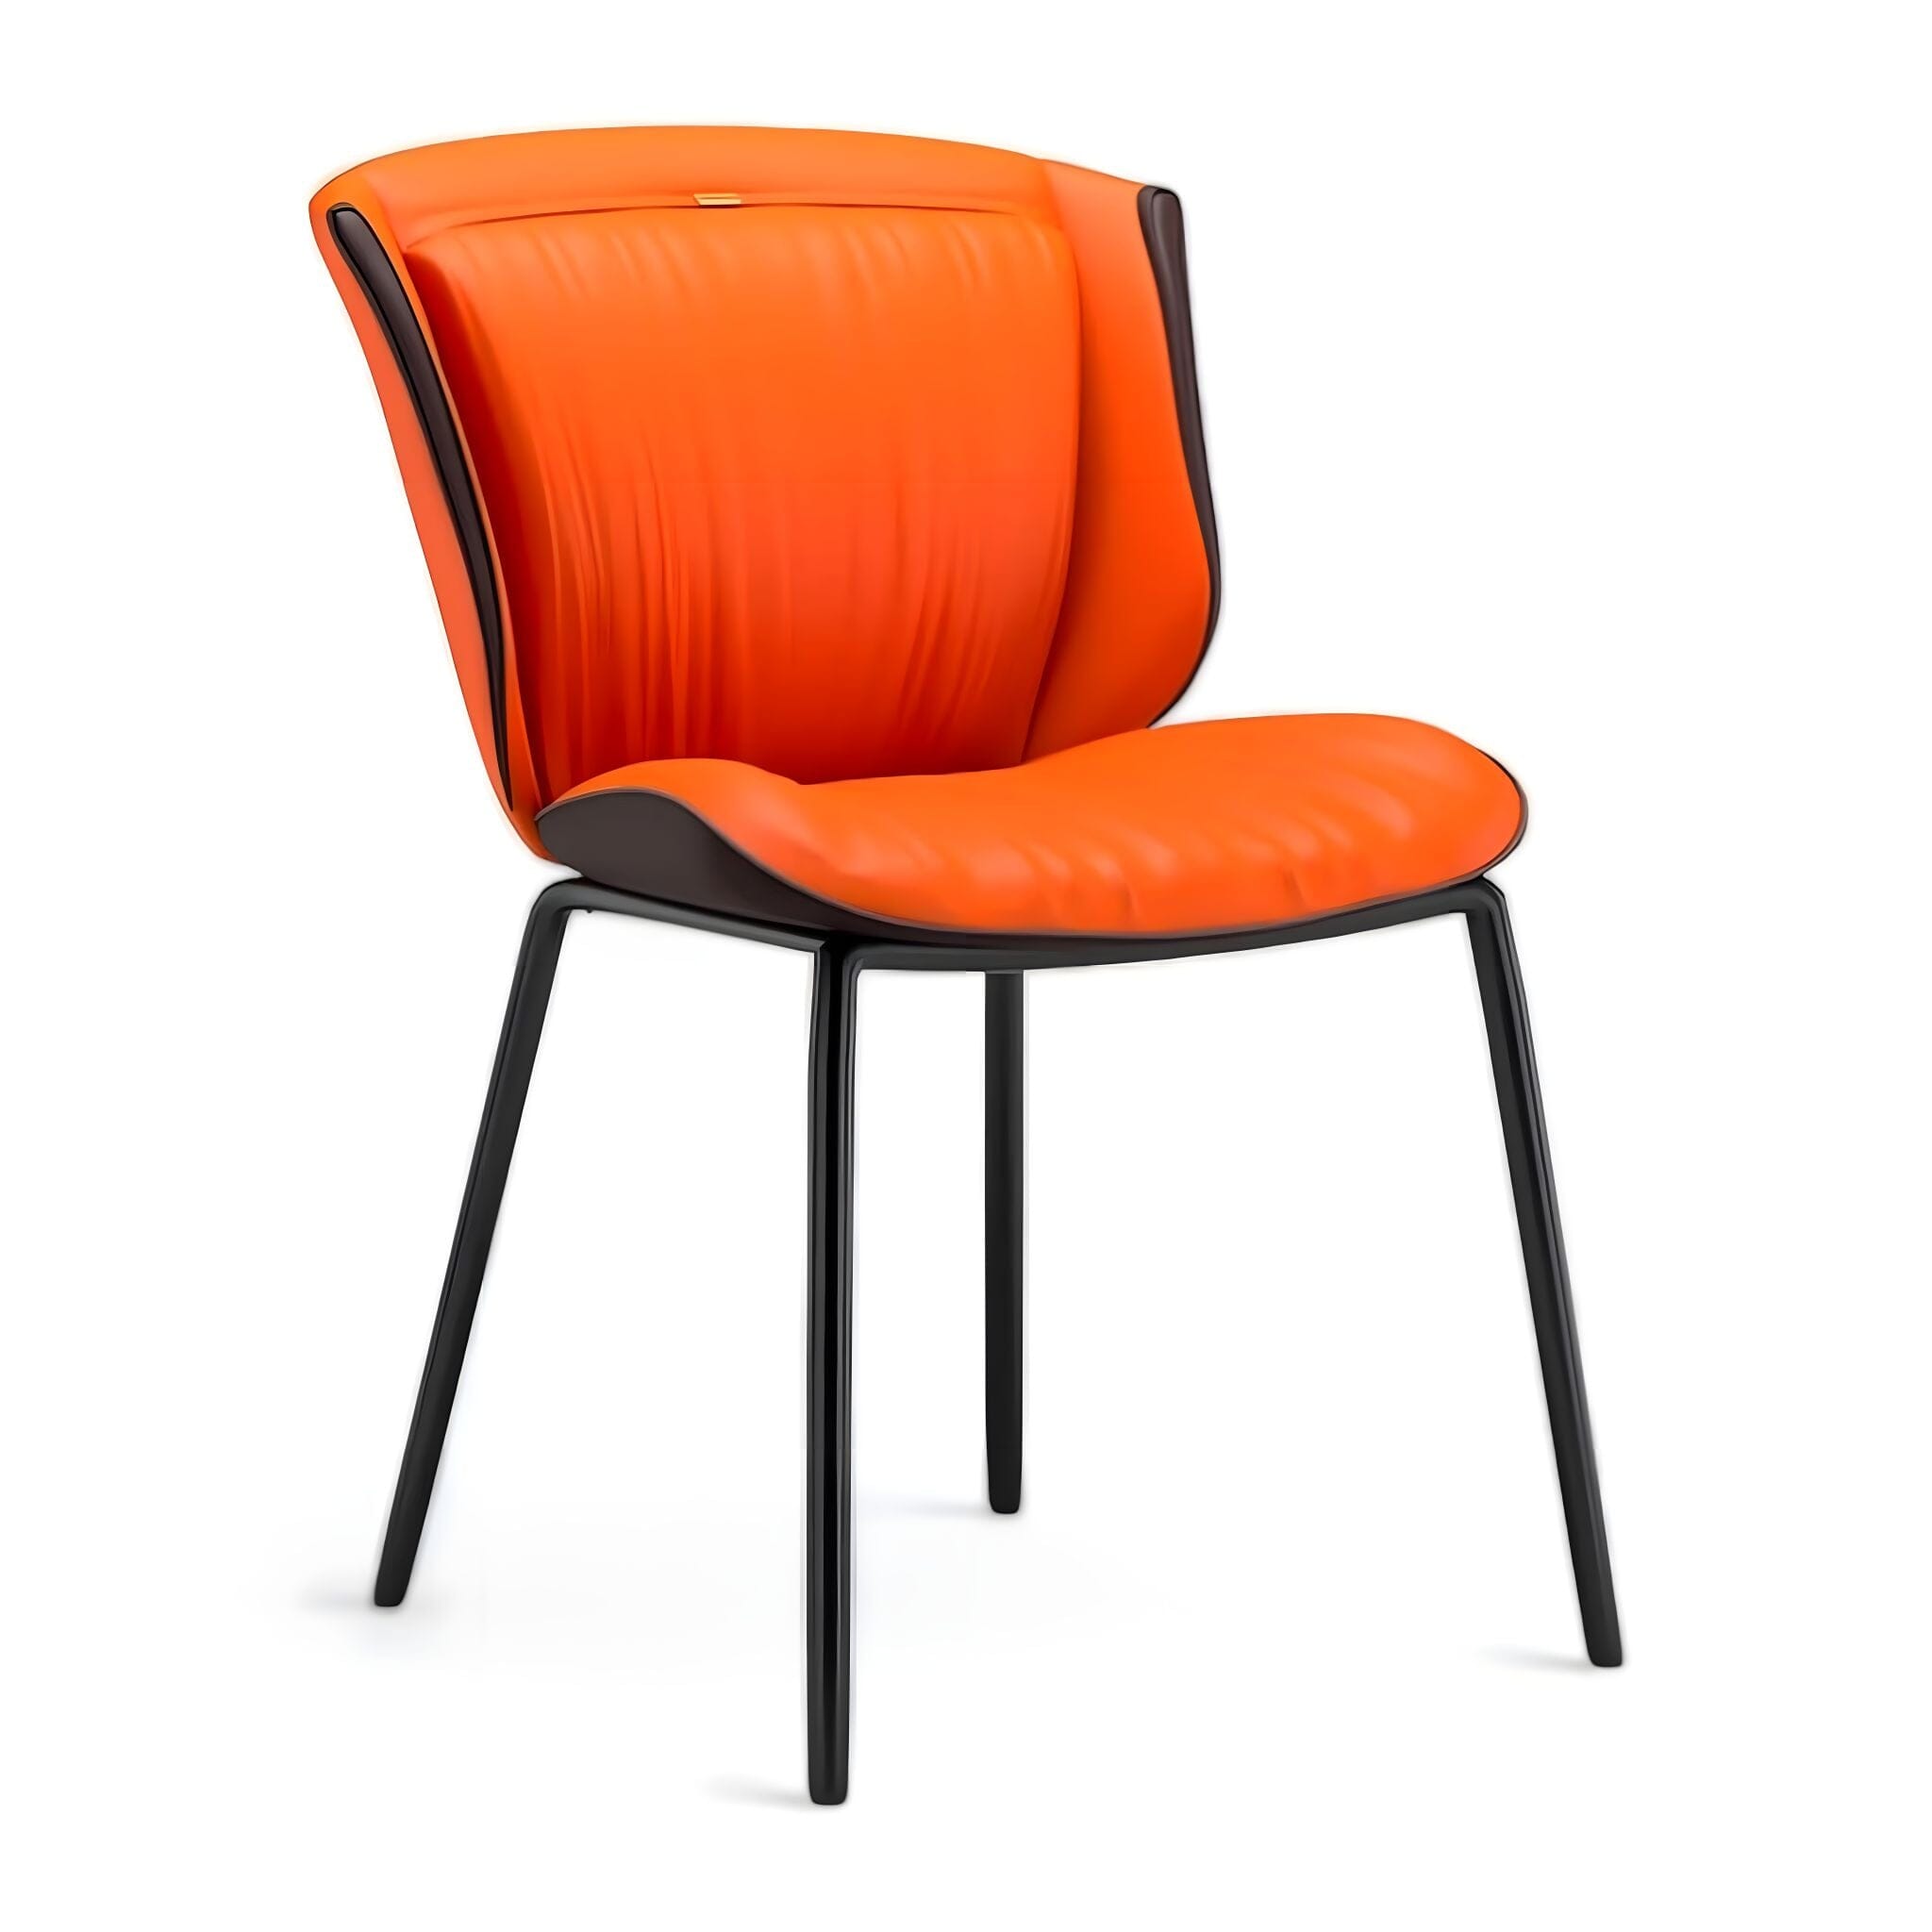 Lise Dining Chairs Chair Orange 